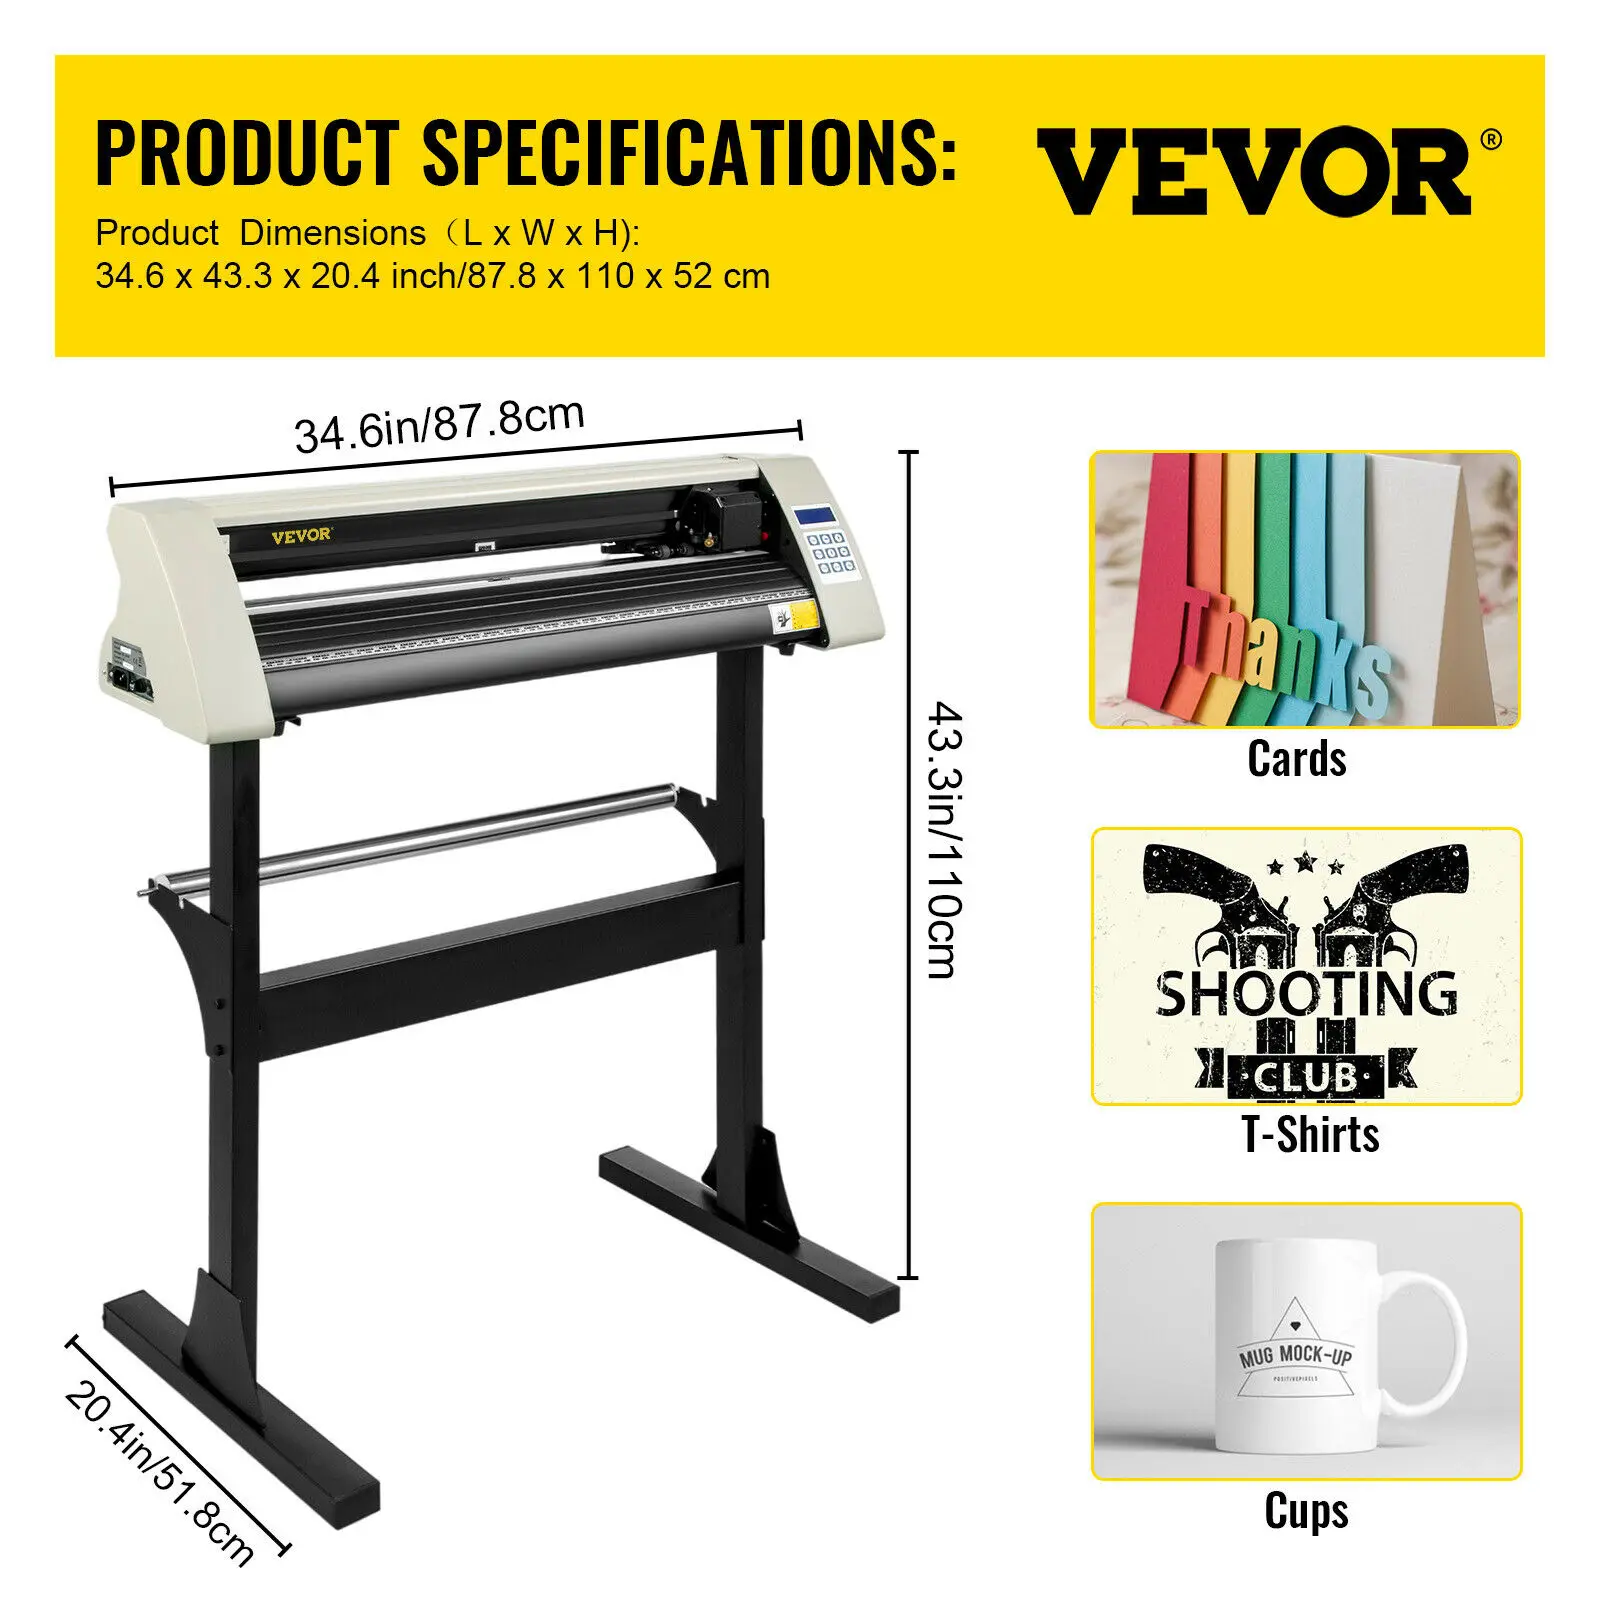 VEVOR 28Inch Vinyl Cutter/Plotter Sign Cutting Machine Software 3 Blades Backlight LCD Display White SIGNMASTER Software images - 6